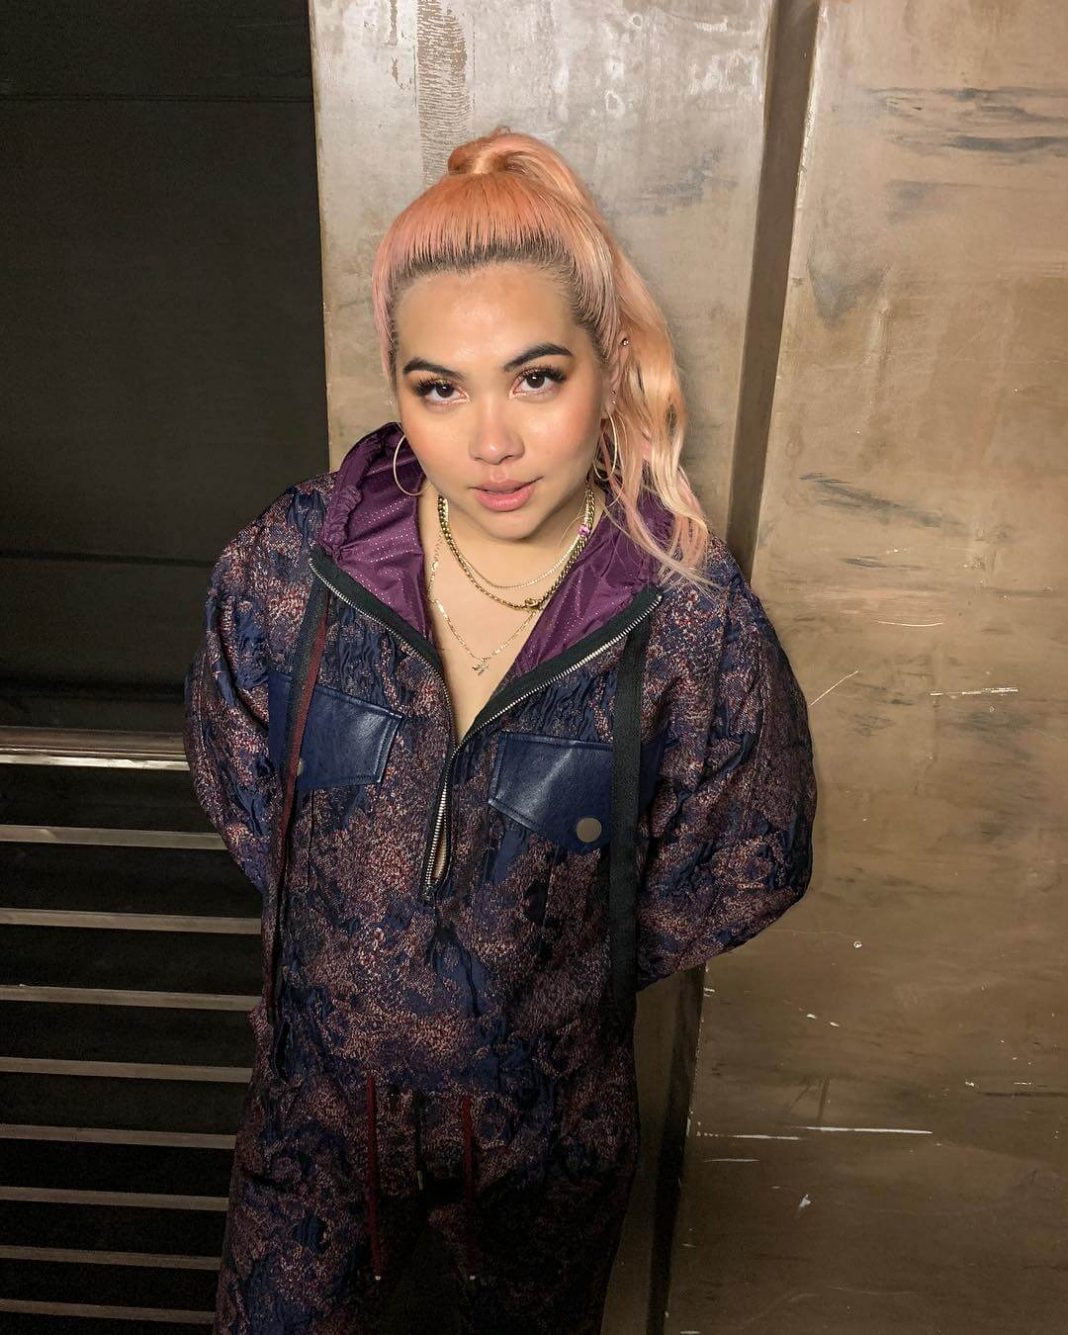 49 Hayley Kiyoko Nude Pictures Which Makes Her An Enigmatic Glamor Quotient 17